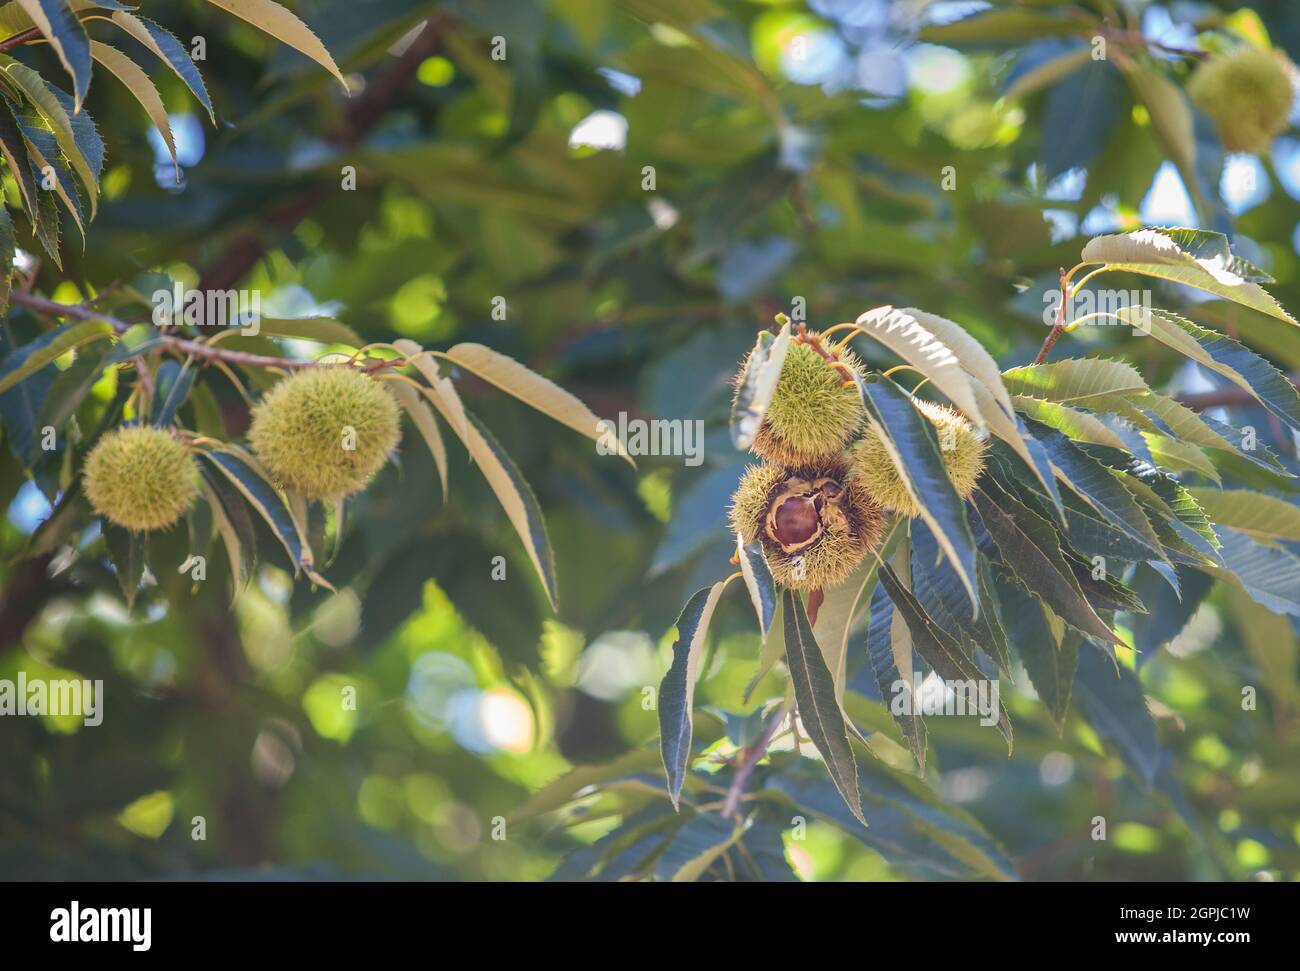 Sweet chestnut open unripe fruits. Castanea sativa or Spanish chestnut tree at the end of the summer Stock Photo